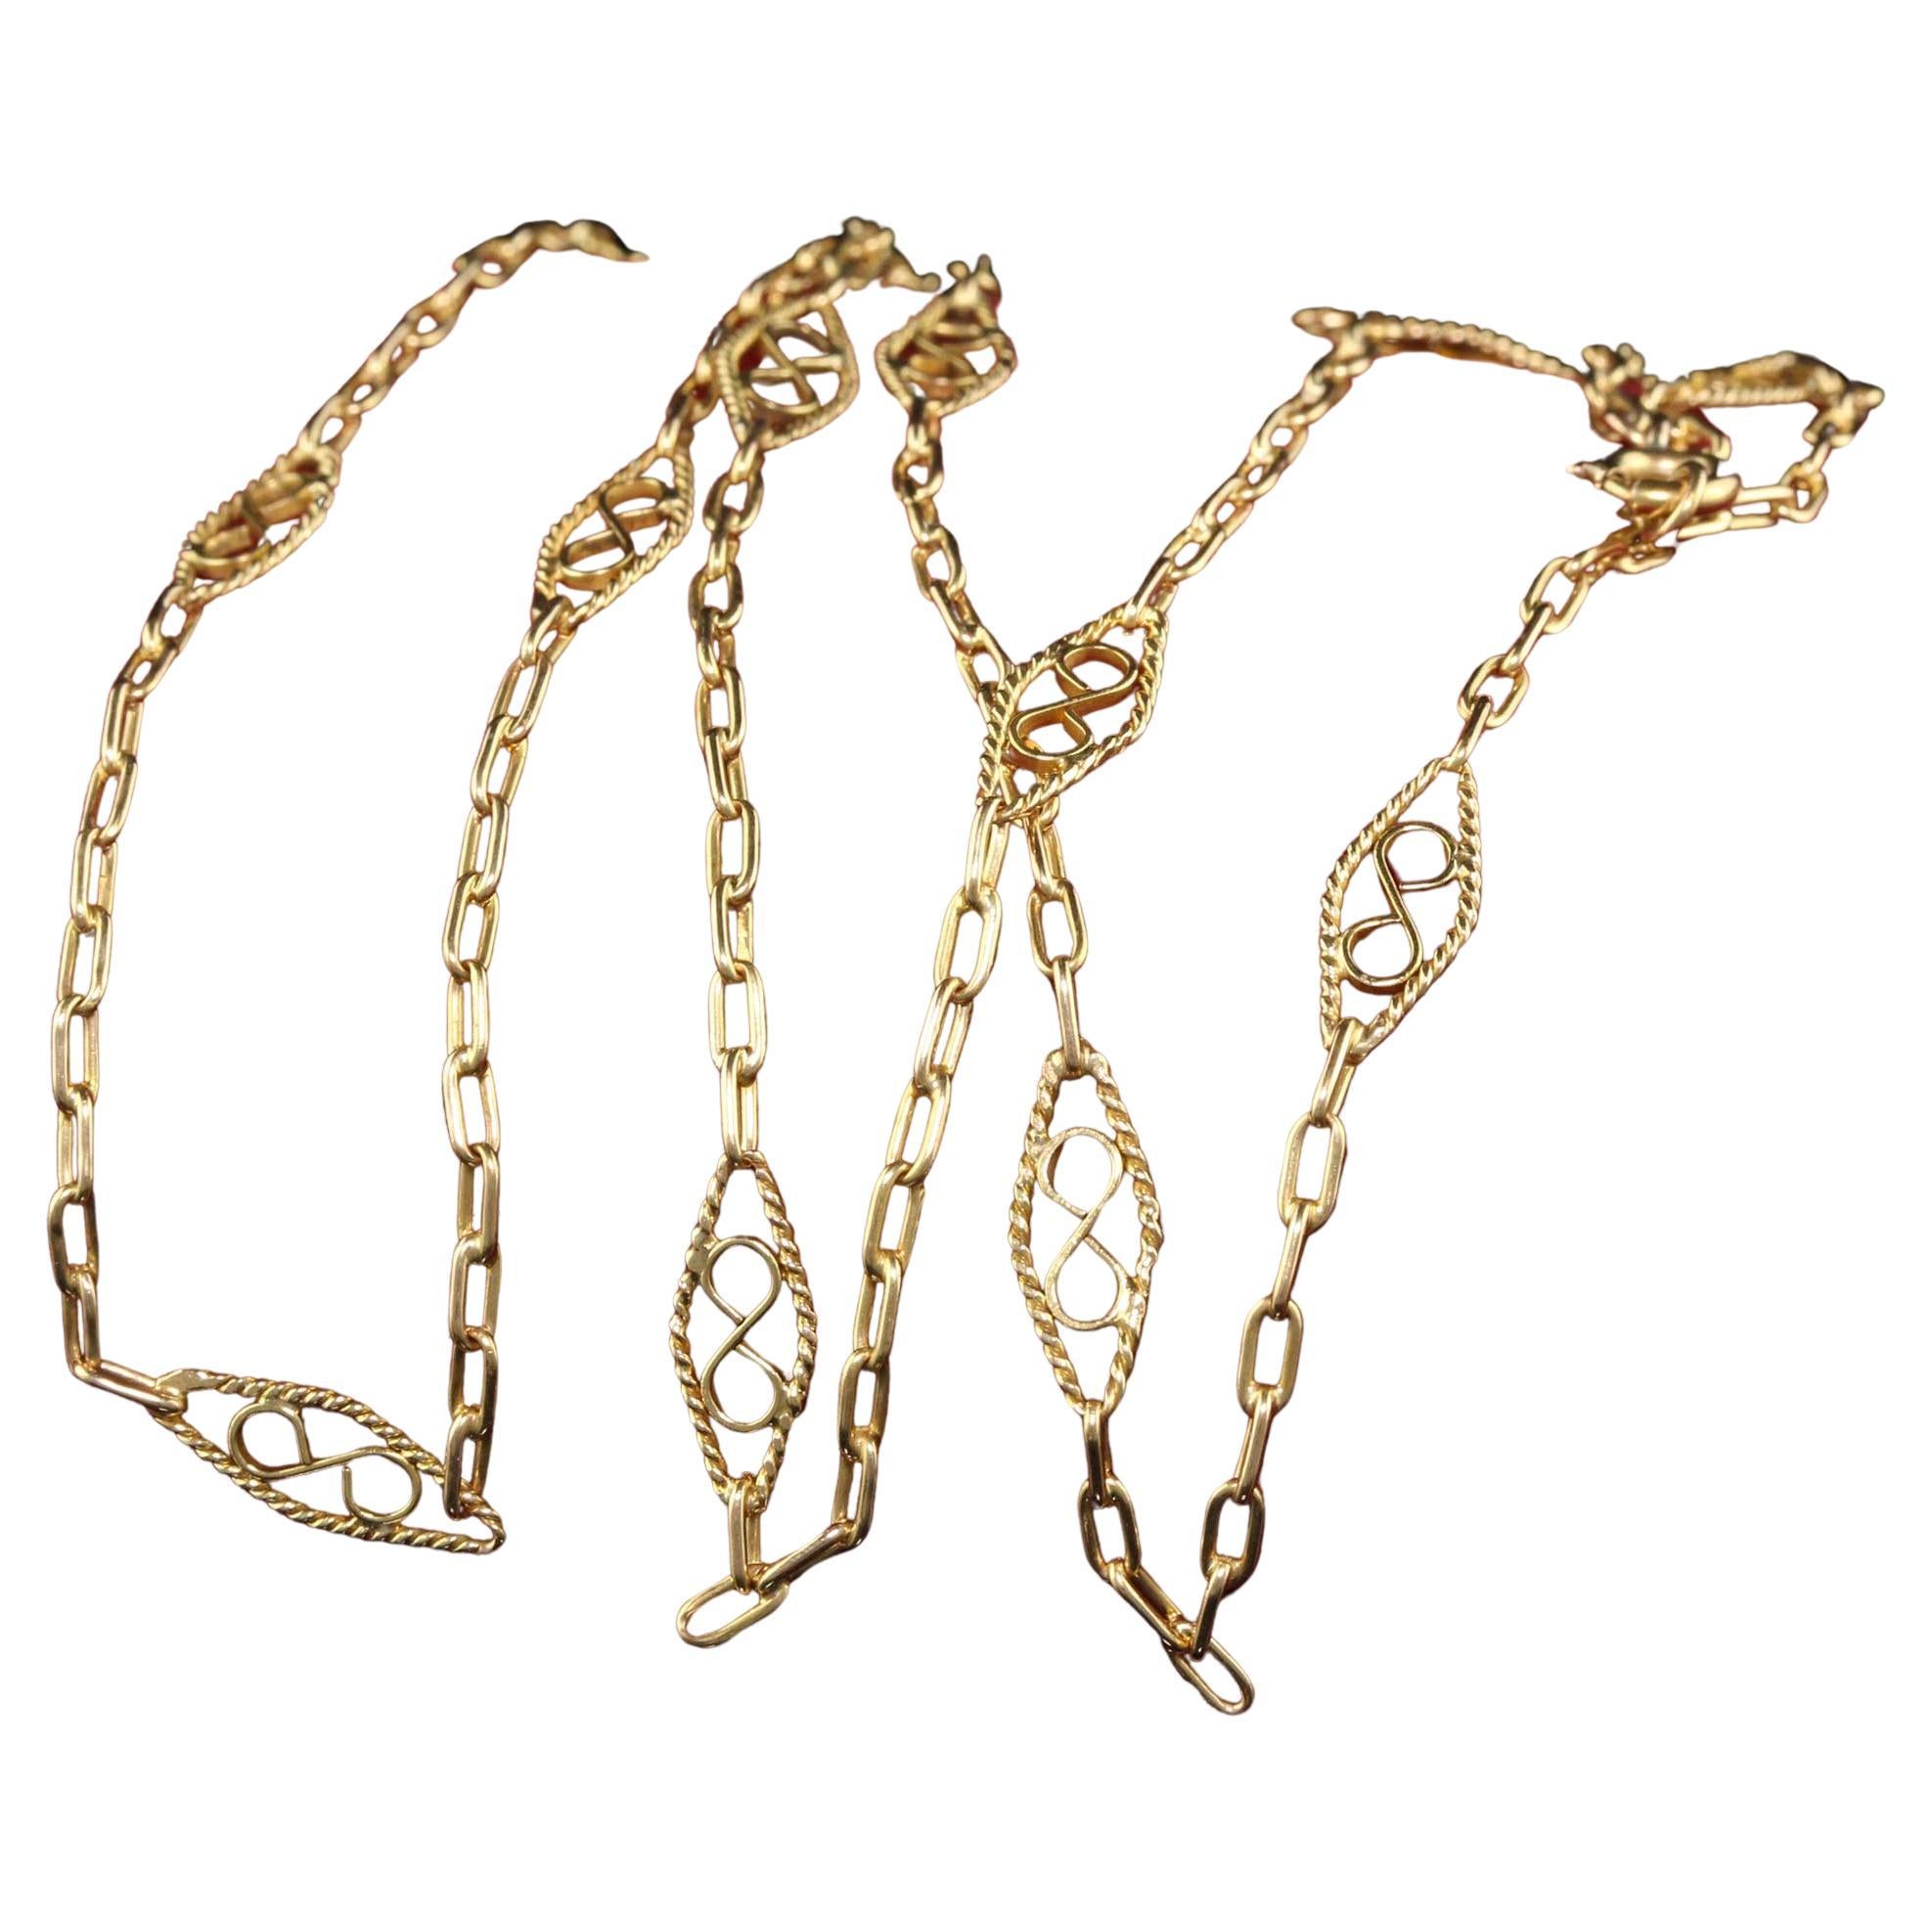 Antique Art Deco 18K Yellow Gold Intricate Link Gold Chain - 26 inches For Sale